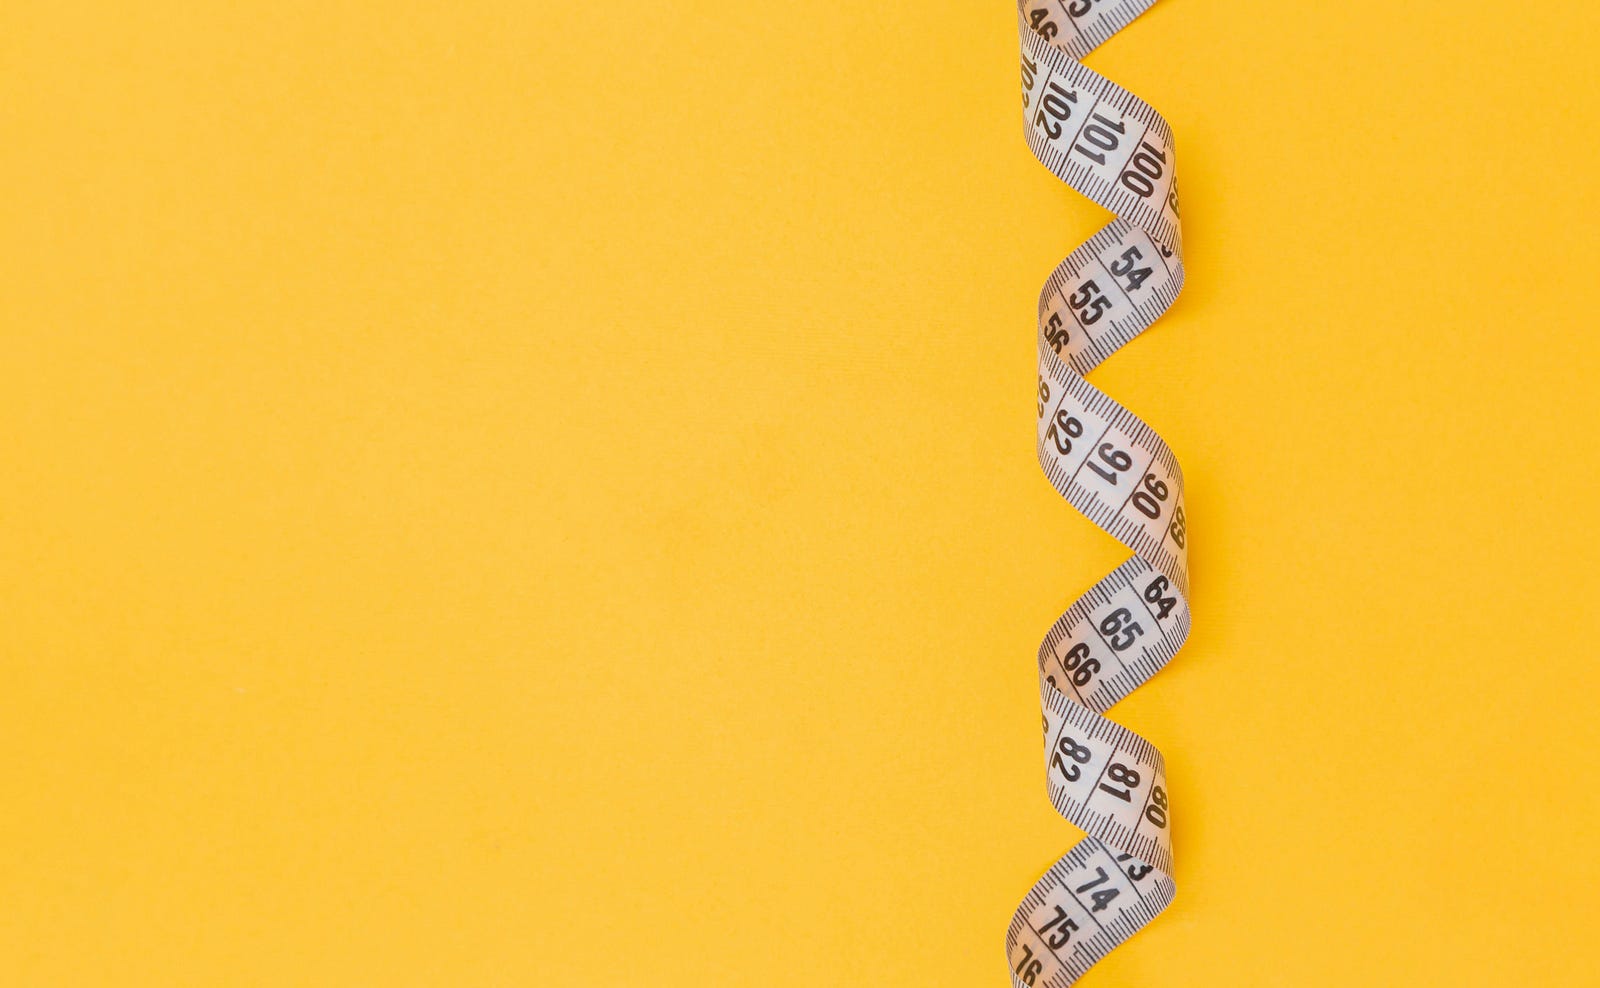 A twisted flexible tape measure against a mustard-colored background.